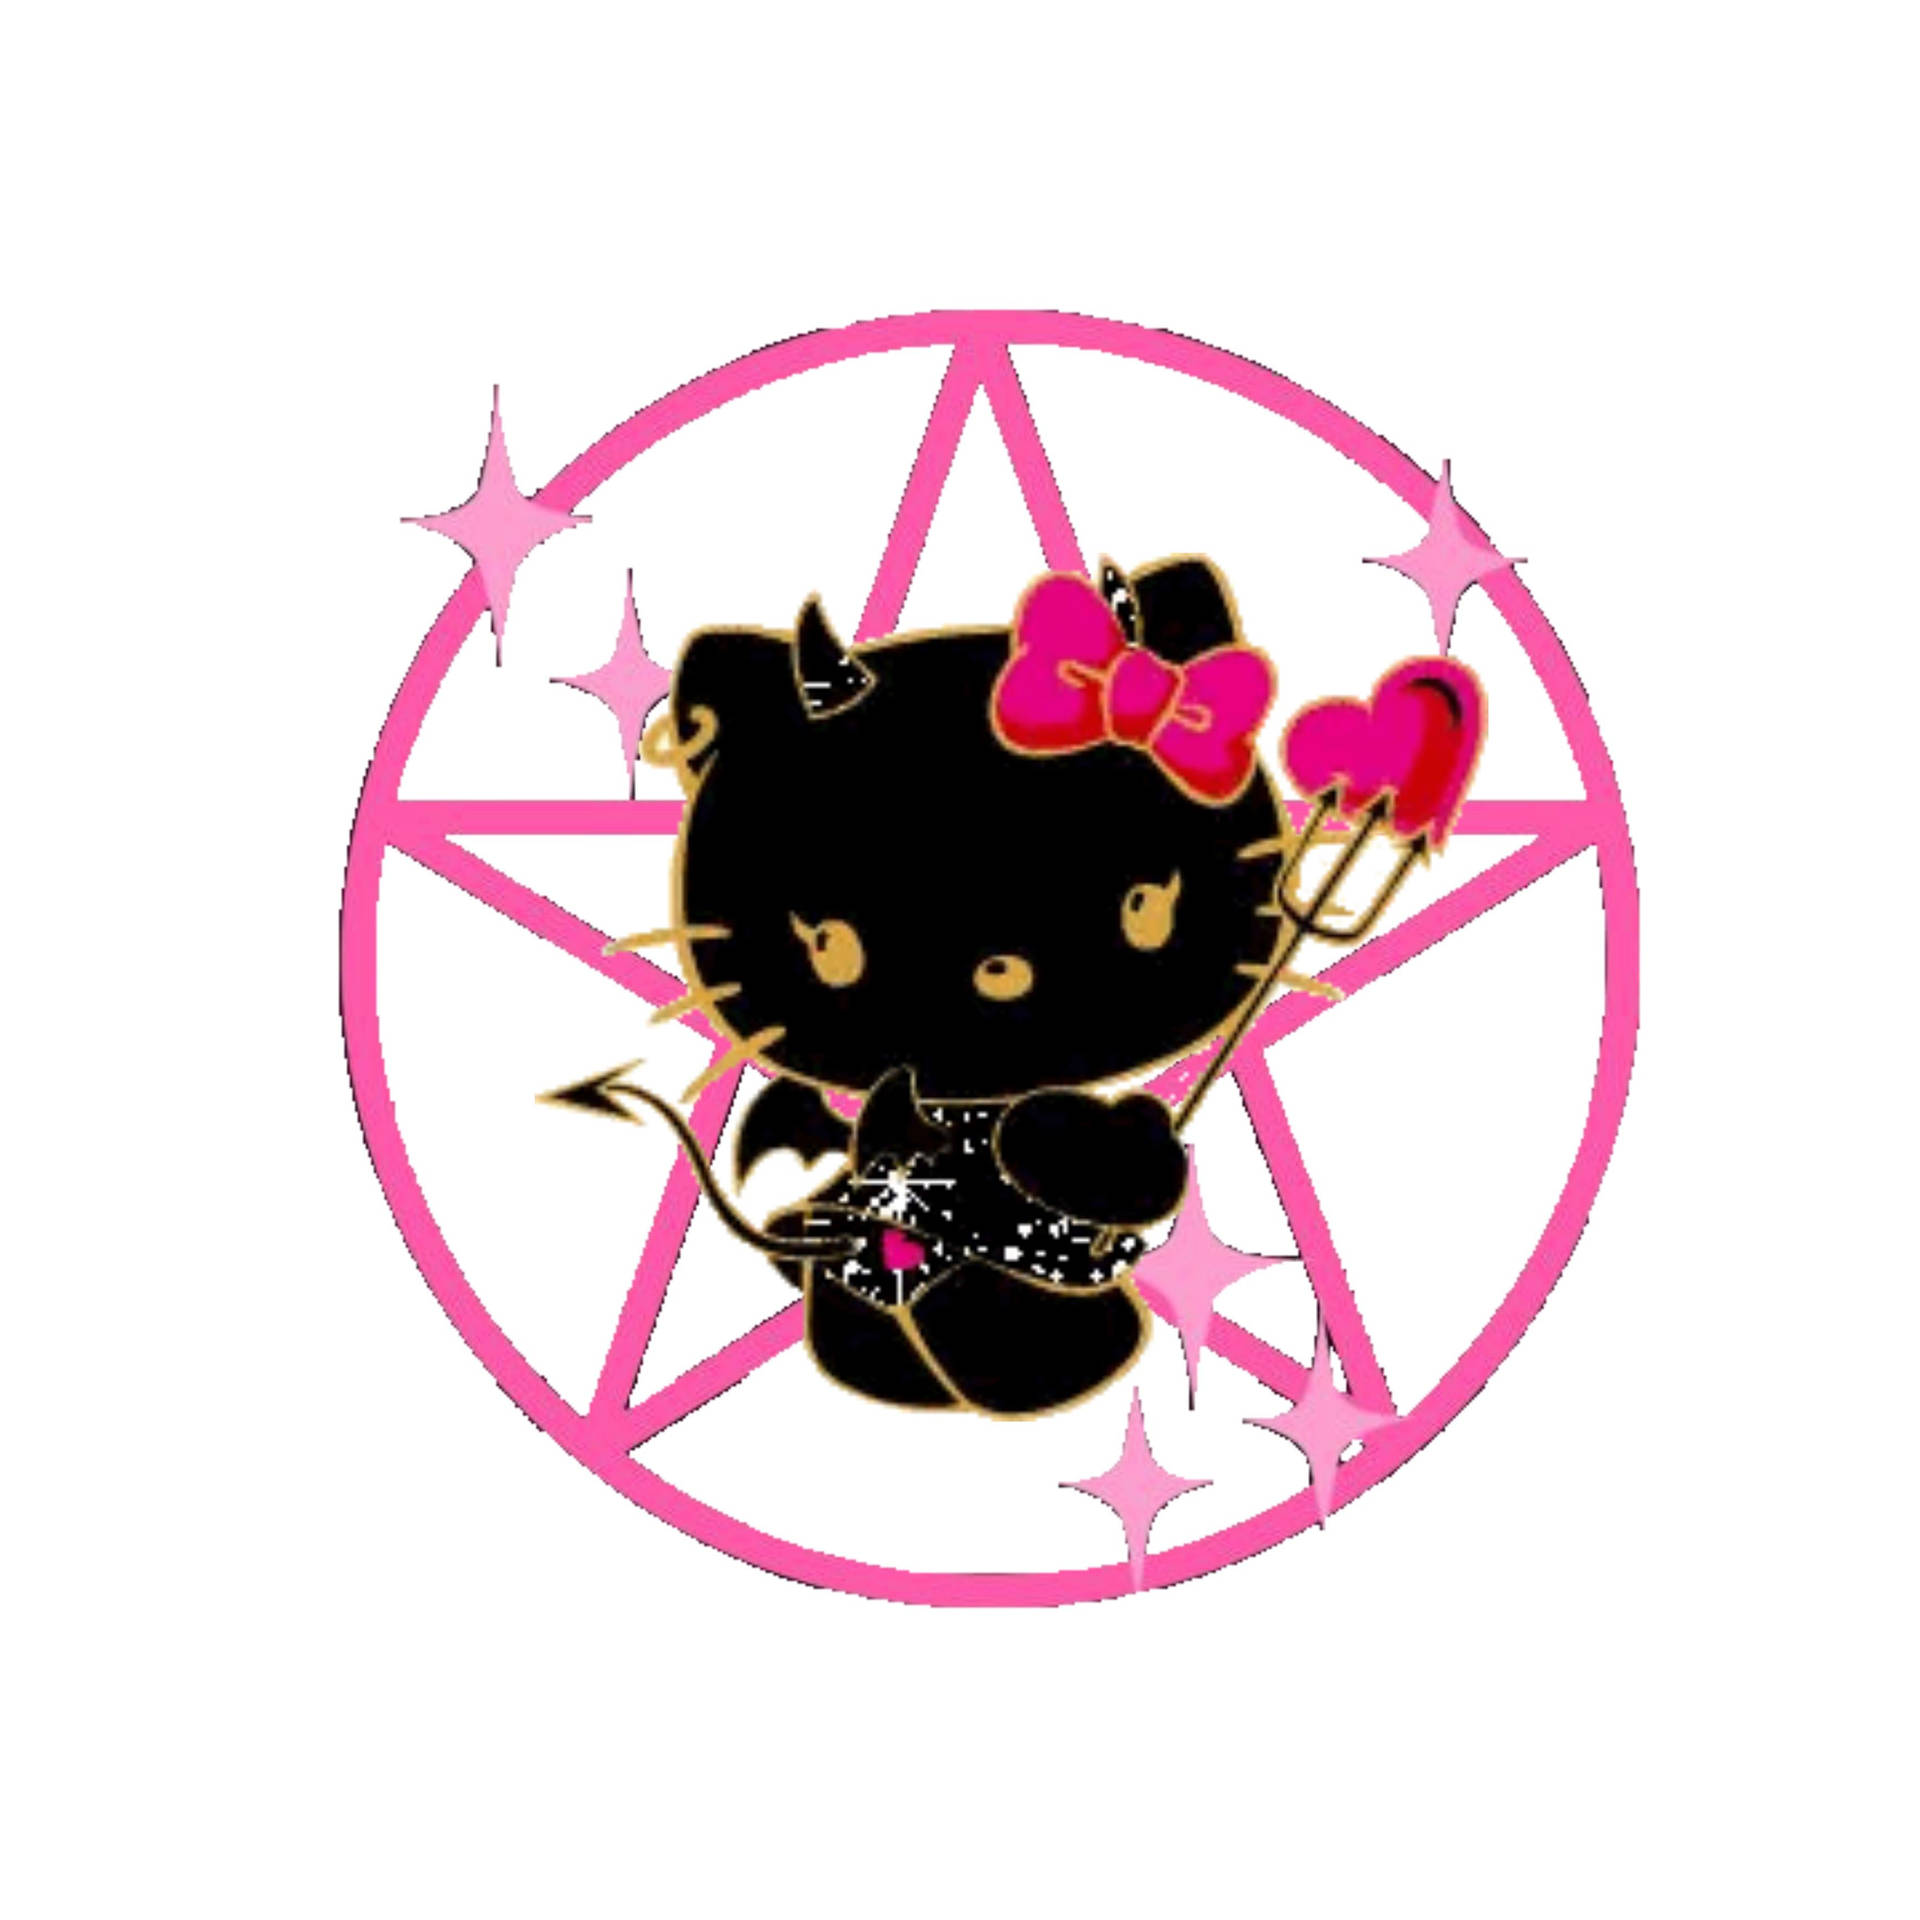 3464X3464 Hello Kitty Halloween Wallpaper and Background